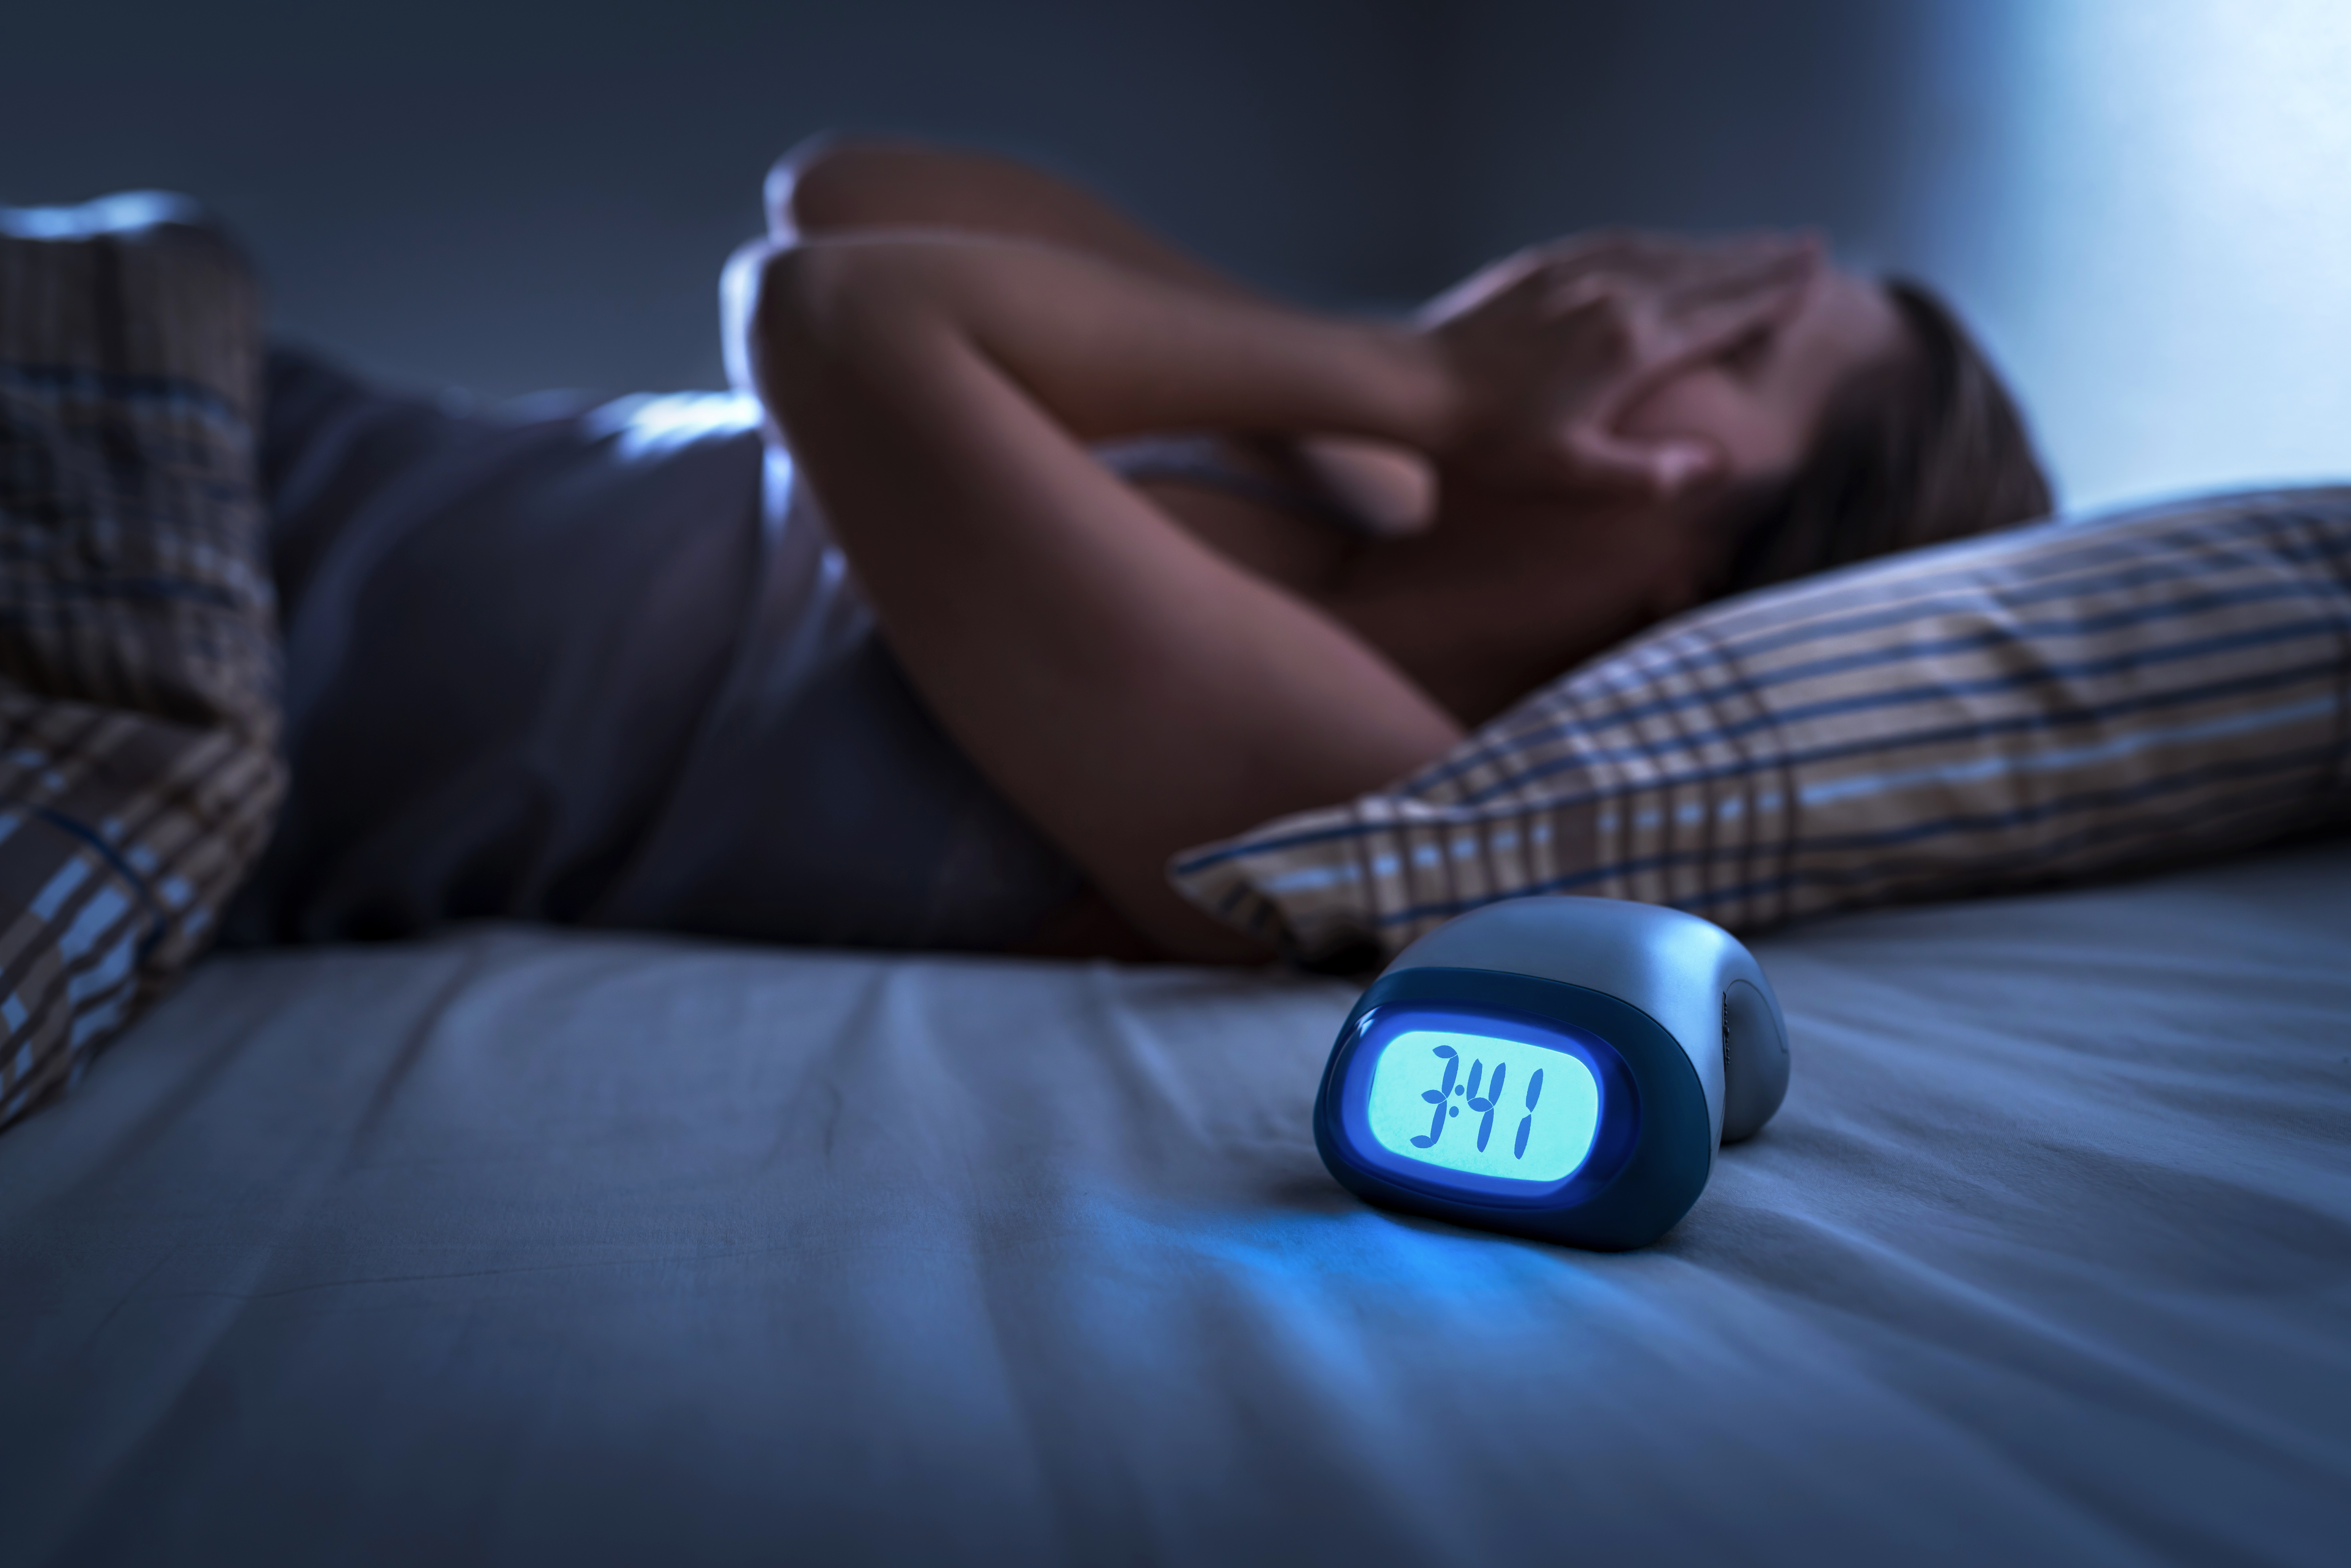 Sleepless woman suffering from insomnia, sleep apnea or stress. Tired and exhausted lady. Headache or migraine. Awake in the middle of the night. Frustrated person with problem. Alarm clock | Source: Getty Images